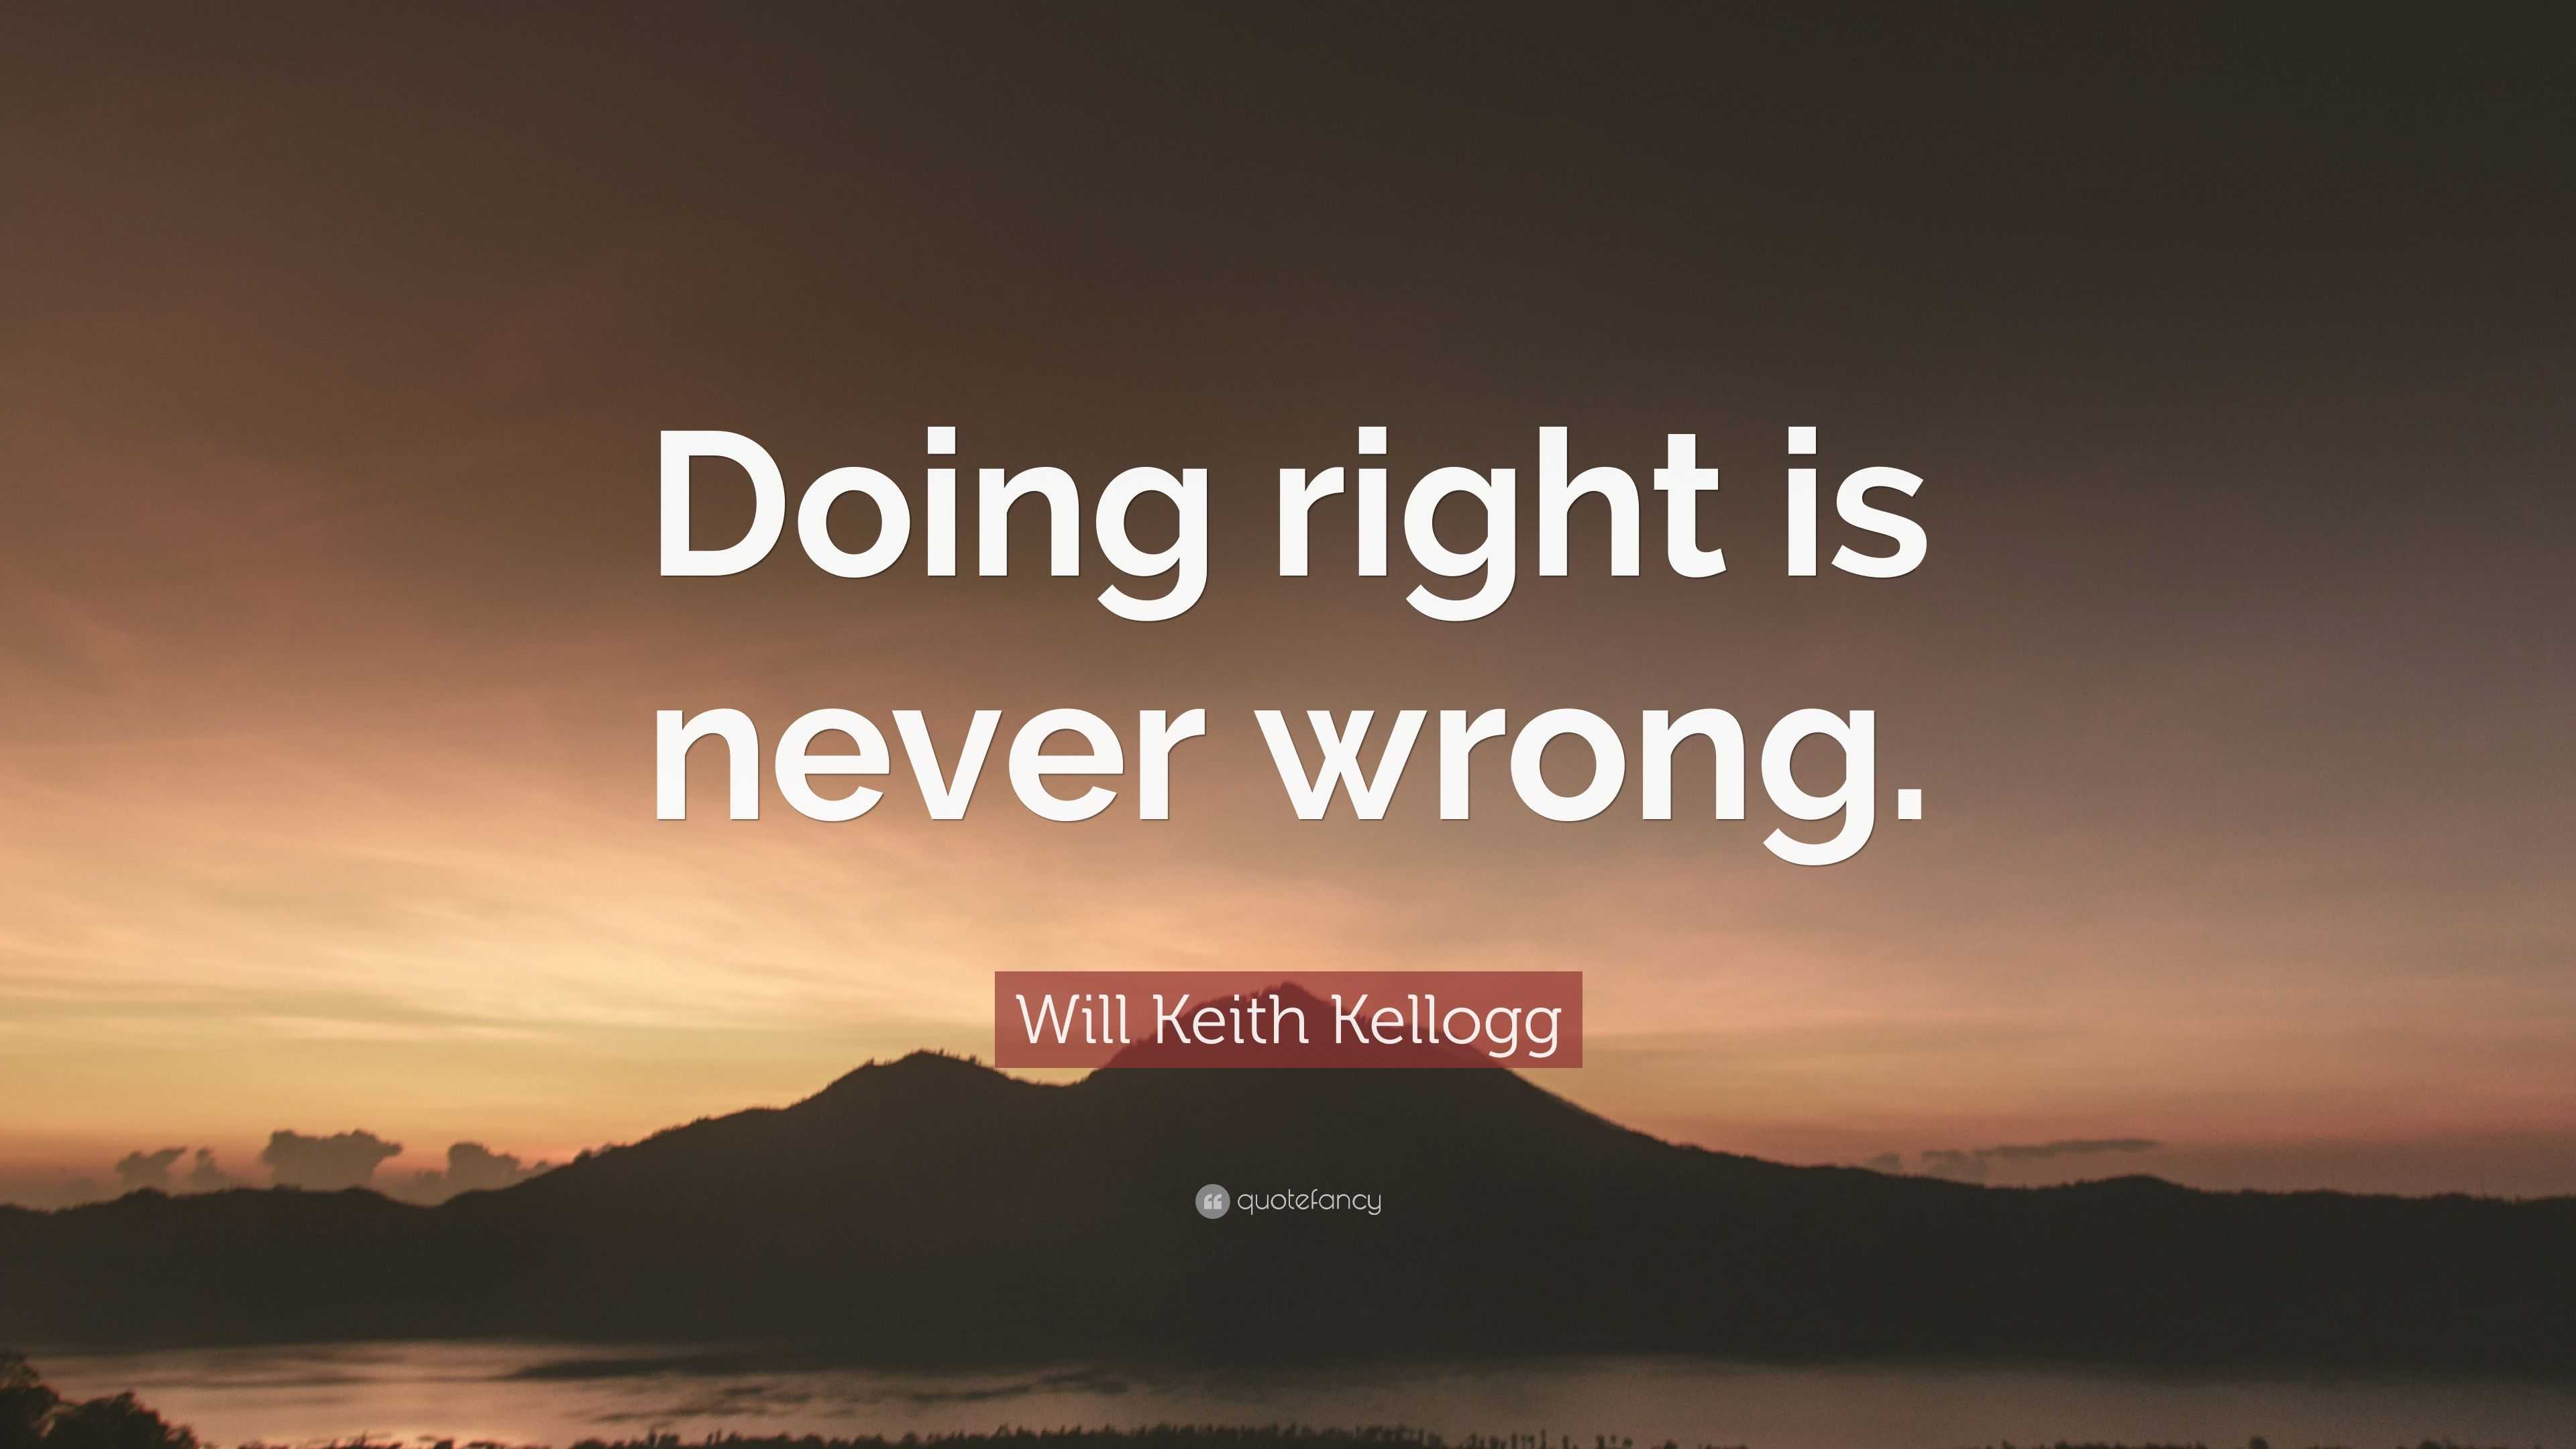 Will Keith Kellogg Quote: “Doing right is never wrong.”